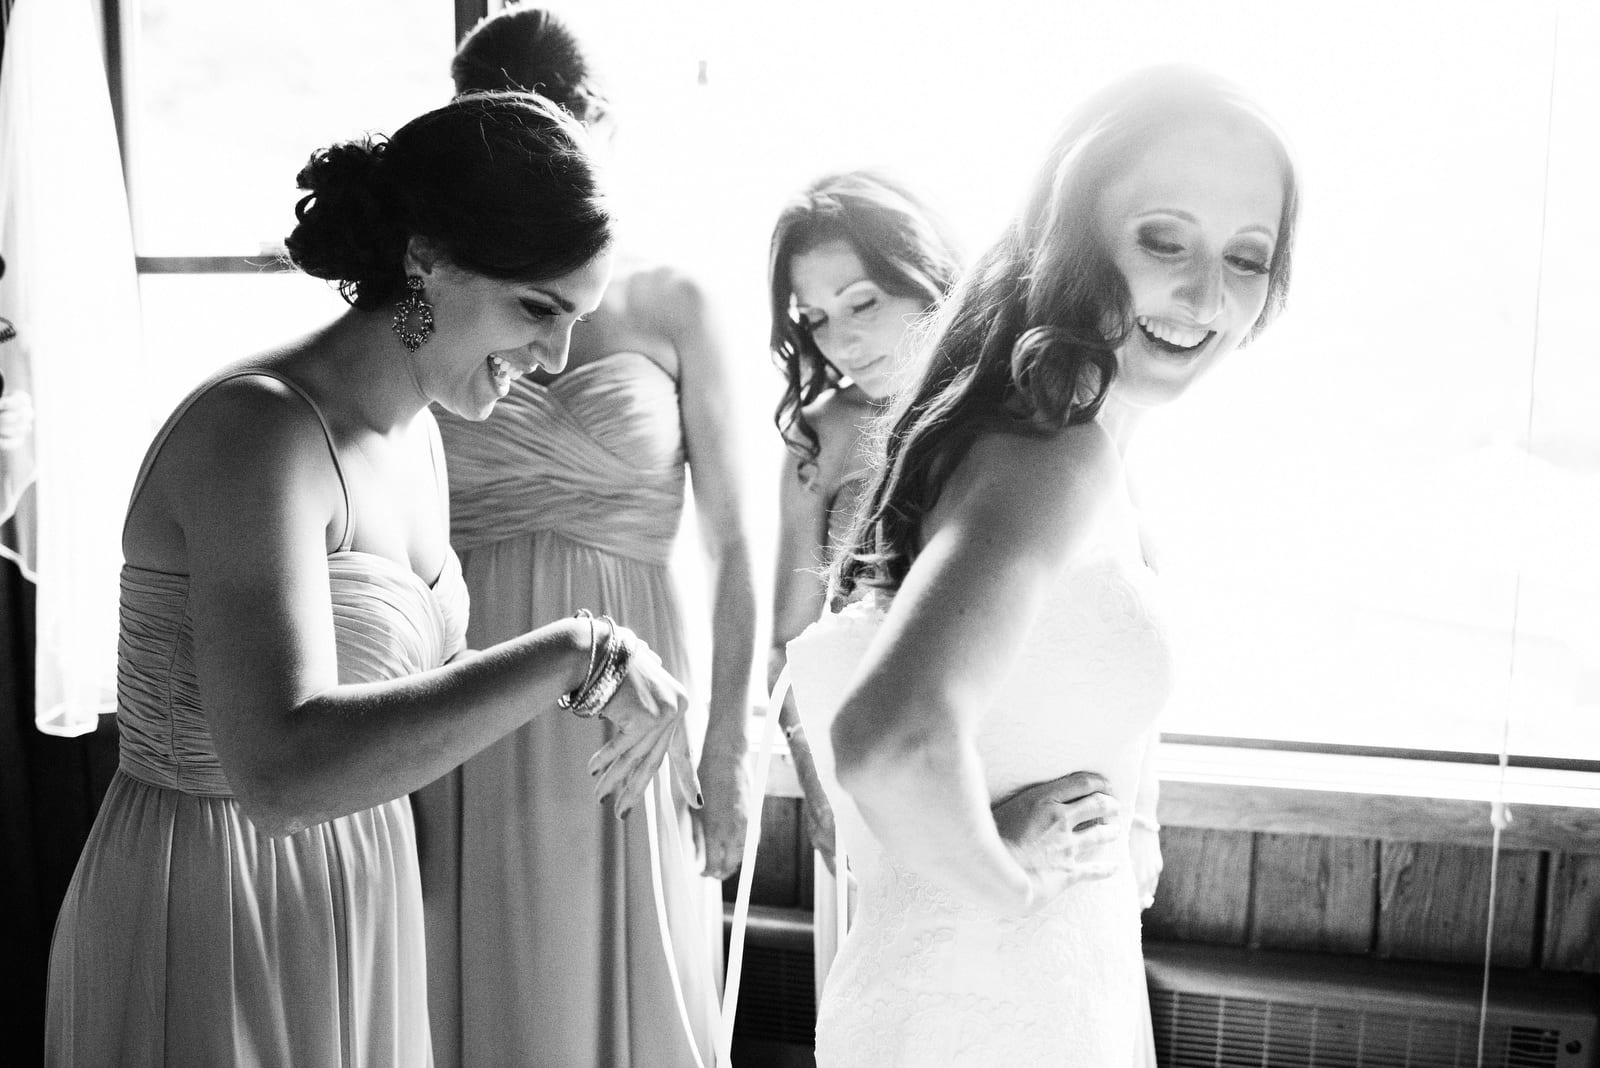 A bride looks over her shoulder and smiles as her bridesmaids stand behind her and laugh as they try to figure out how to lace the dress up.